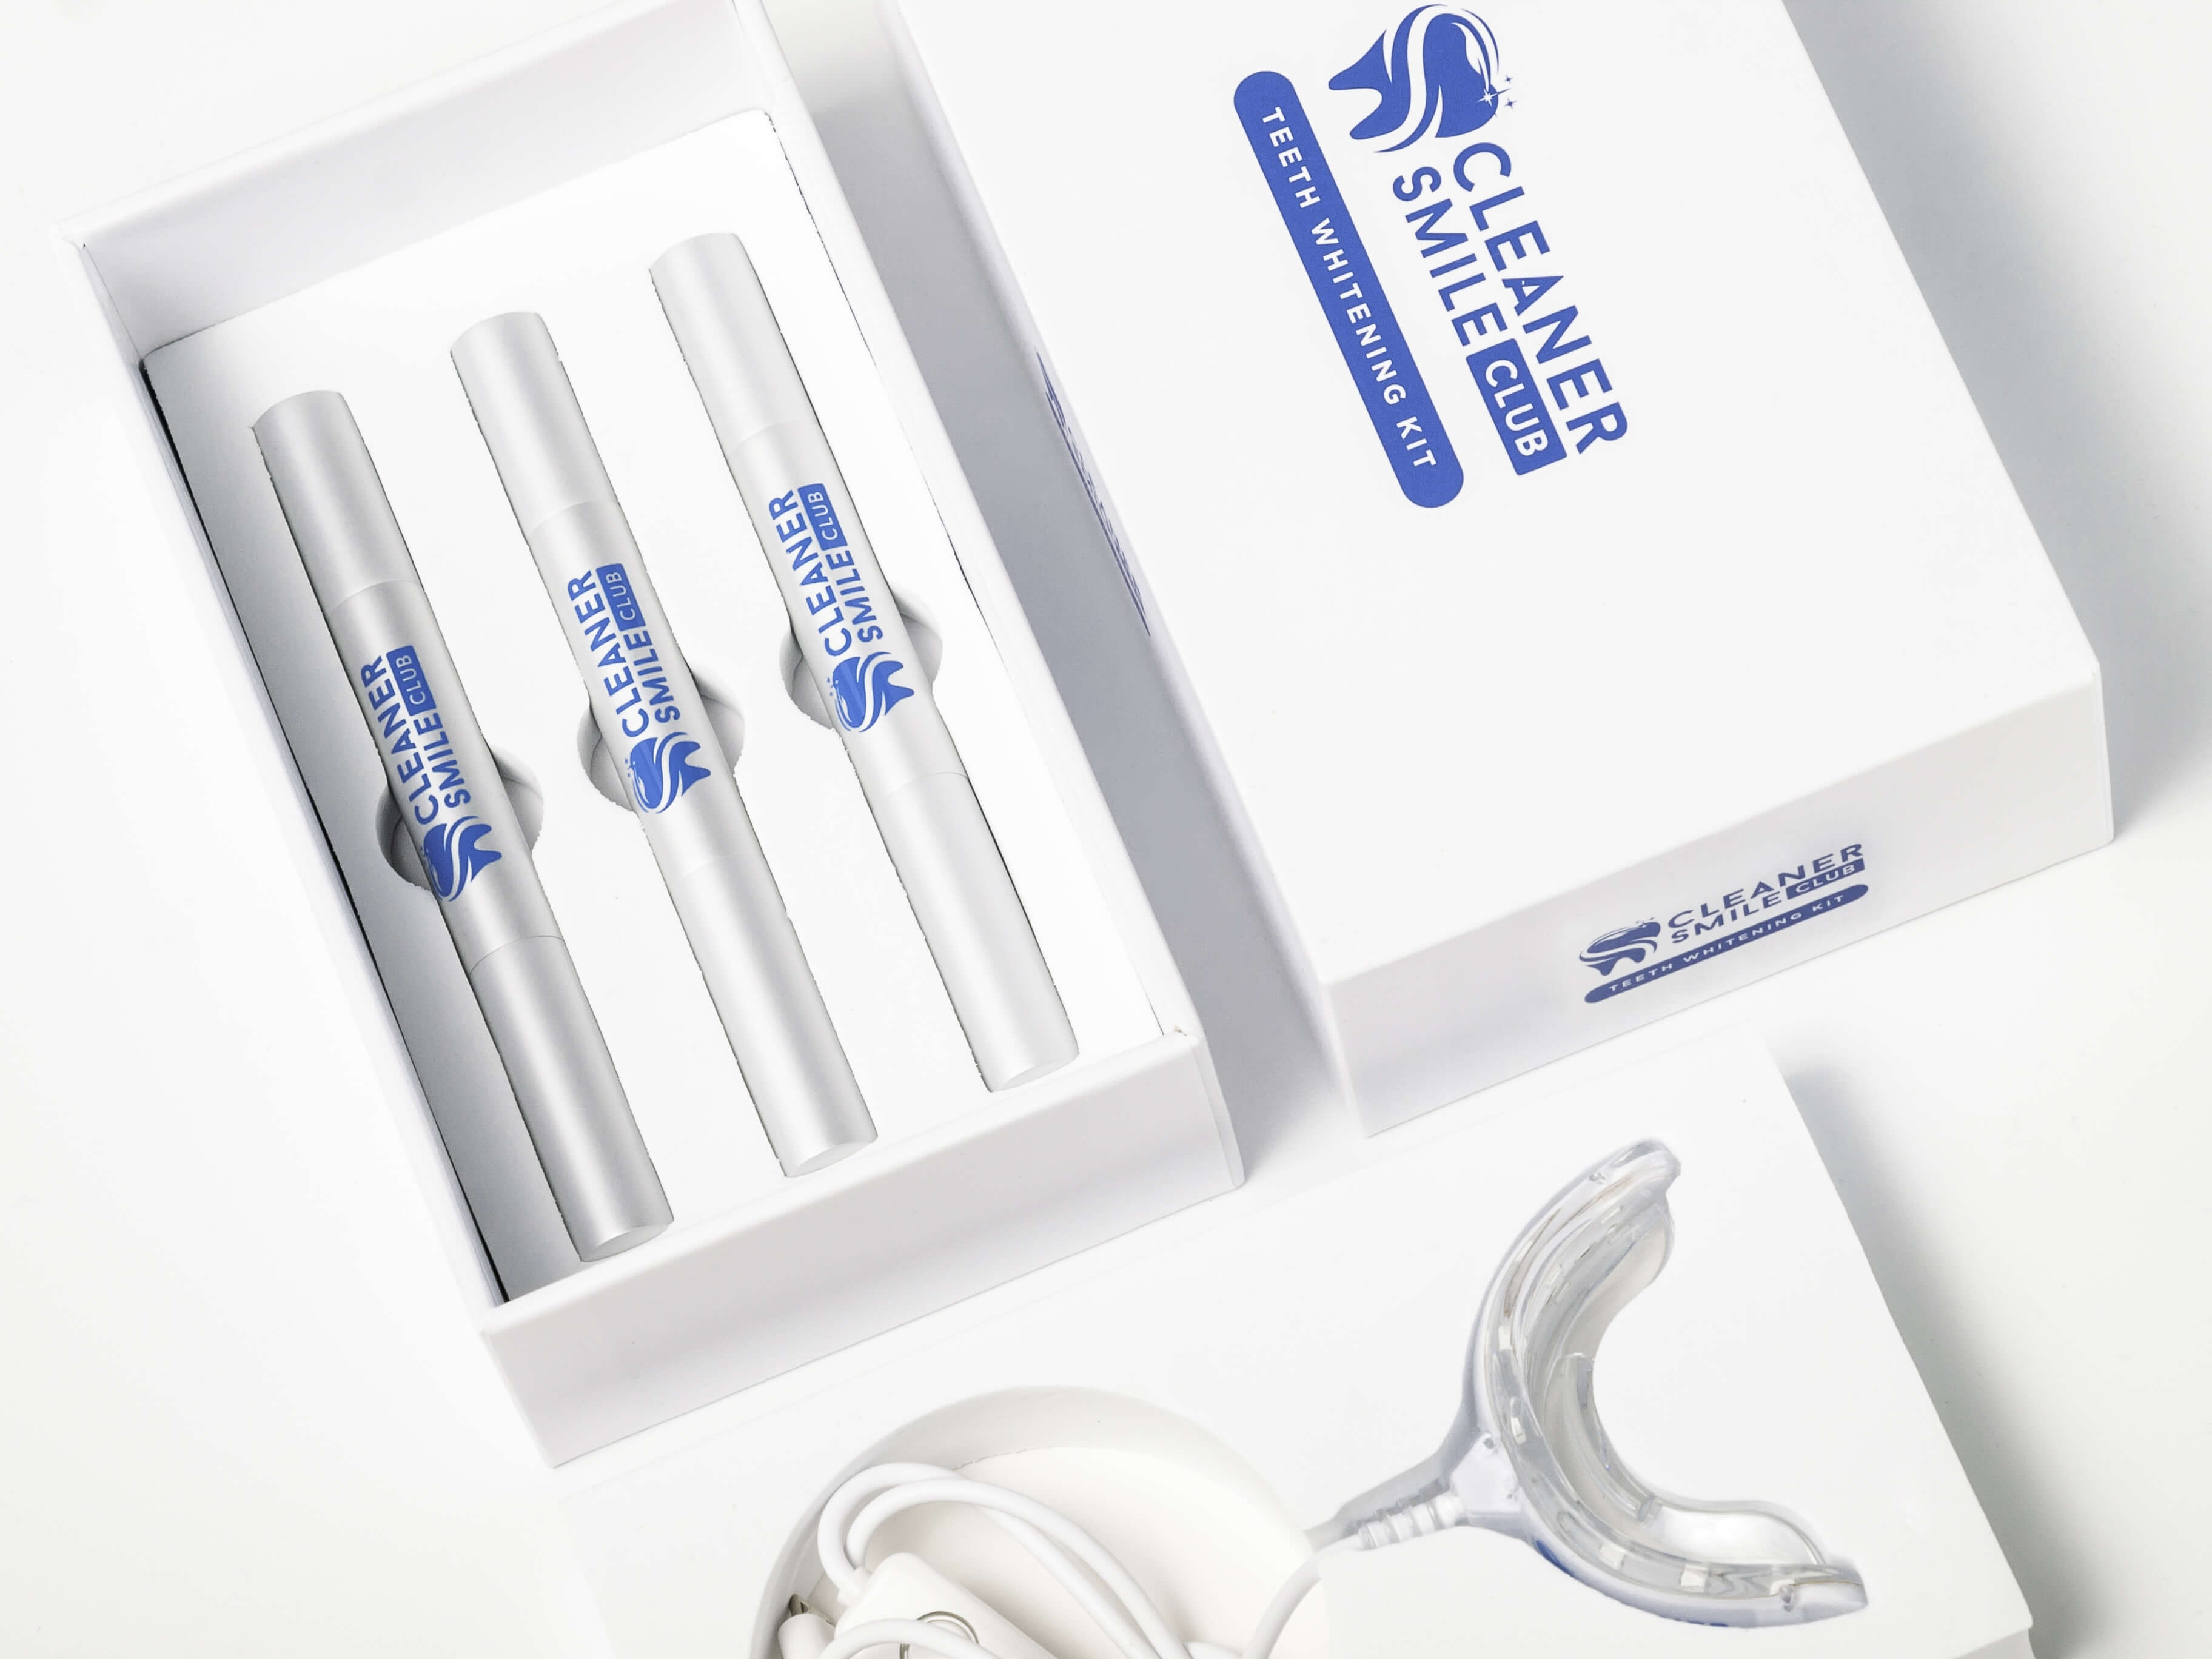 Cosmetic teeth whitening white kit from Cleaner Smile Club brand on white background with 3 whitening pens and LED mouth piece photo made by Fantastic Imago Branding, Advertising and Consulting Agency